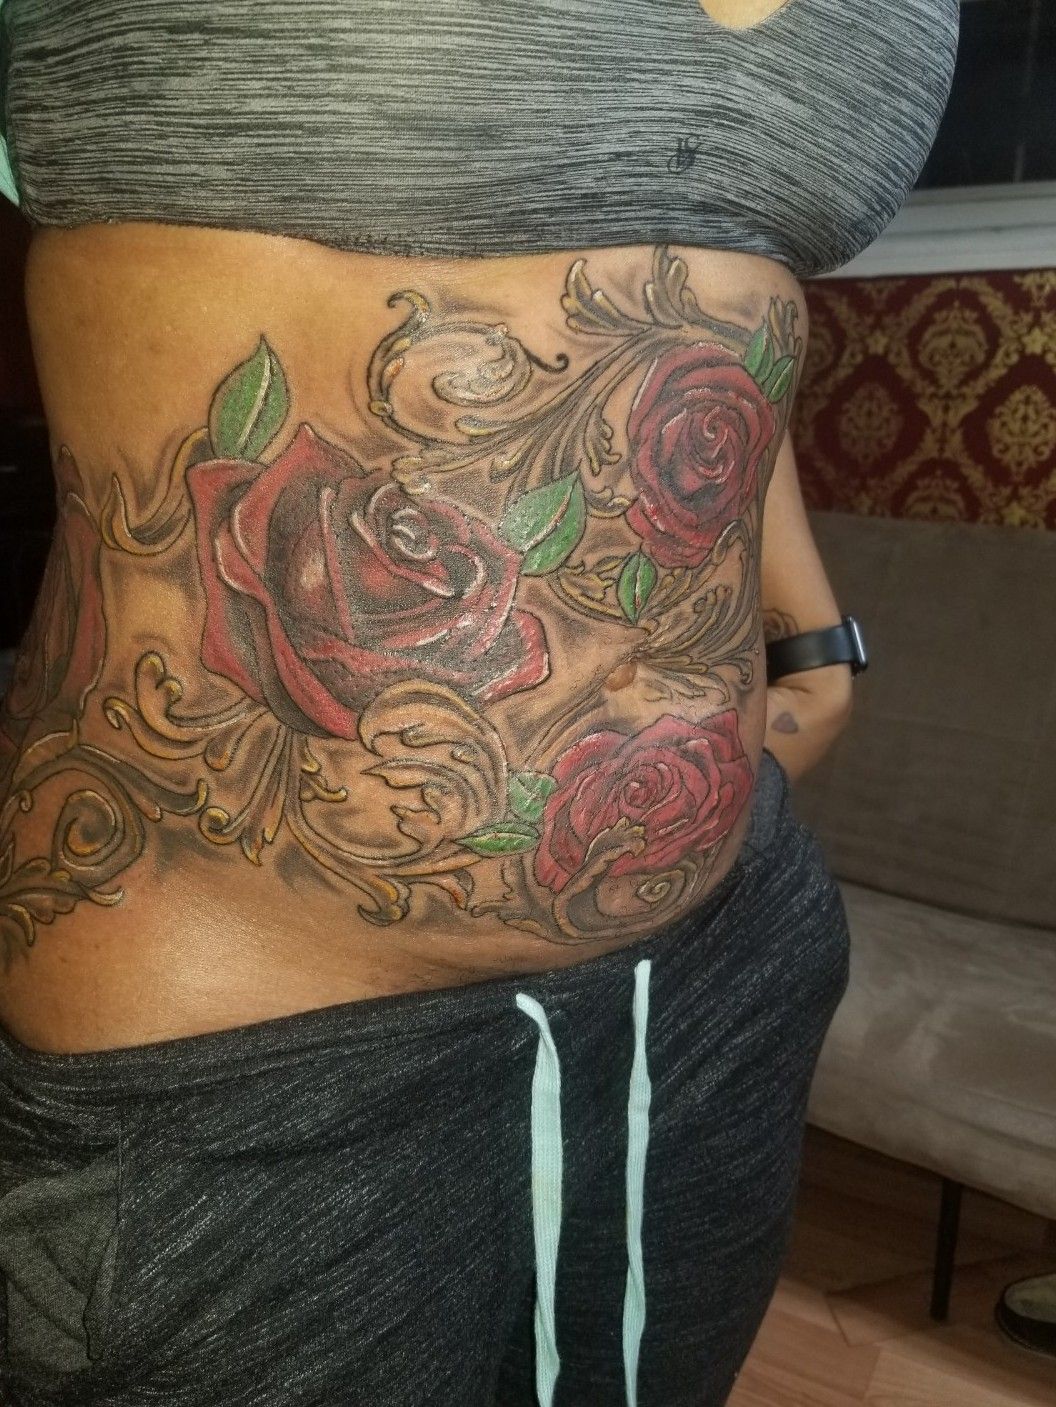 Tattooing Over Stretch Marks  Stories and Ink